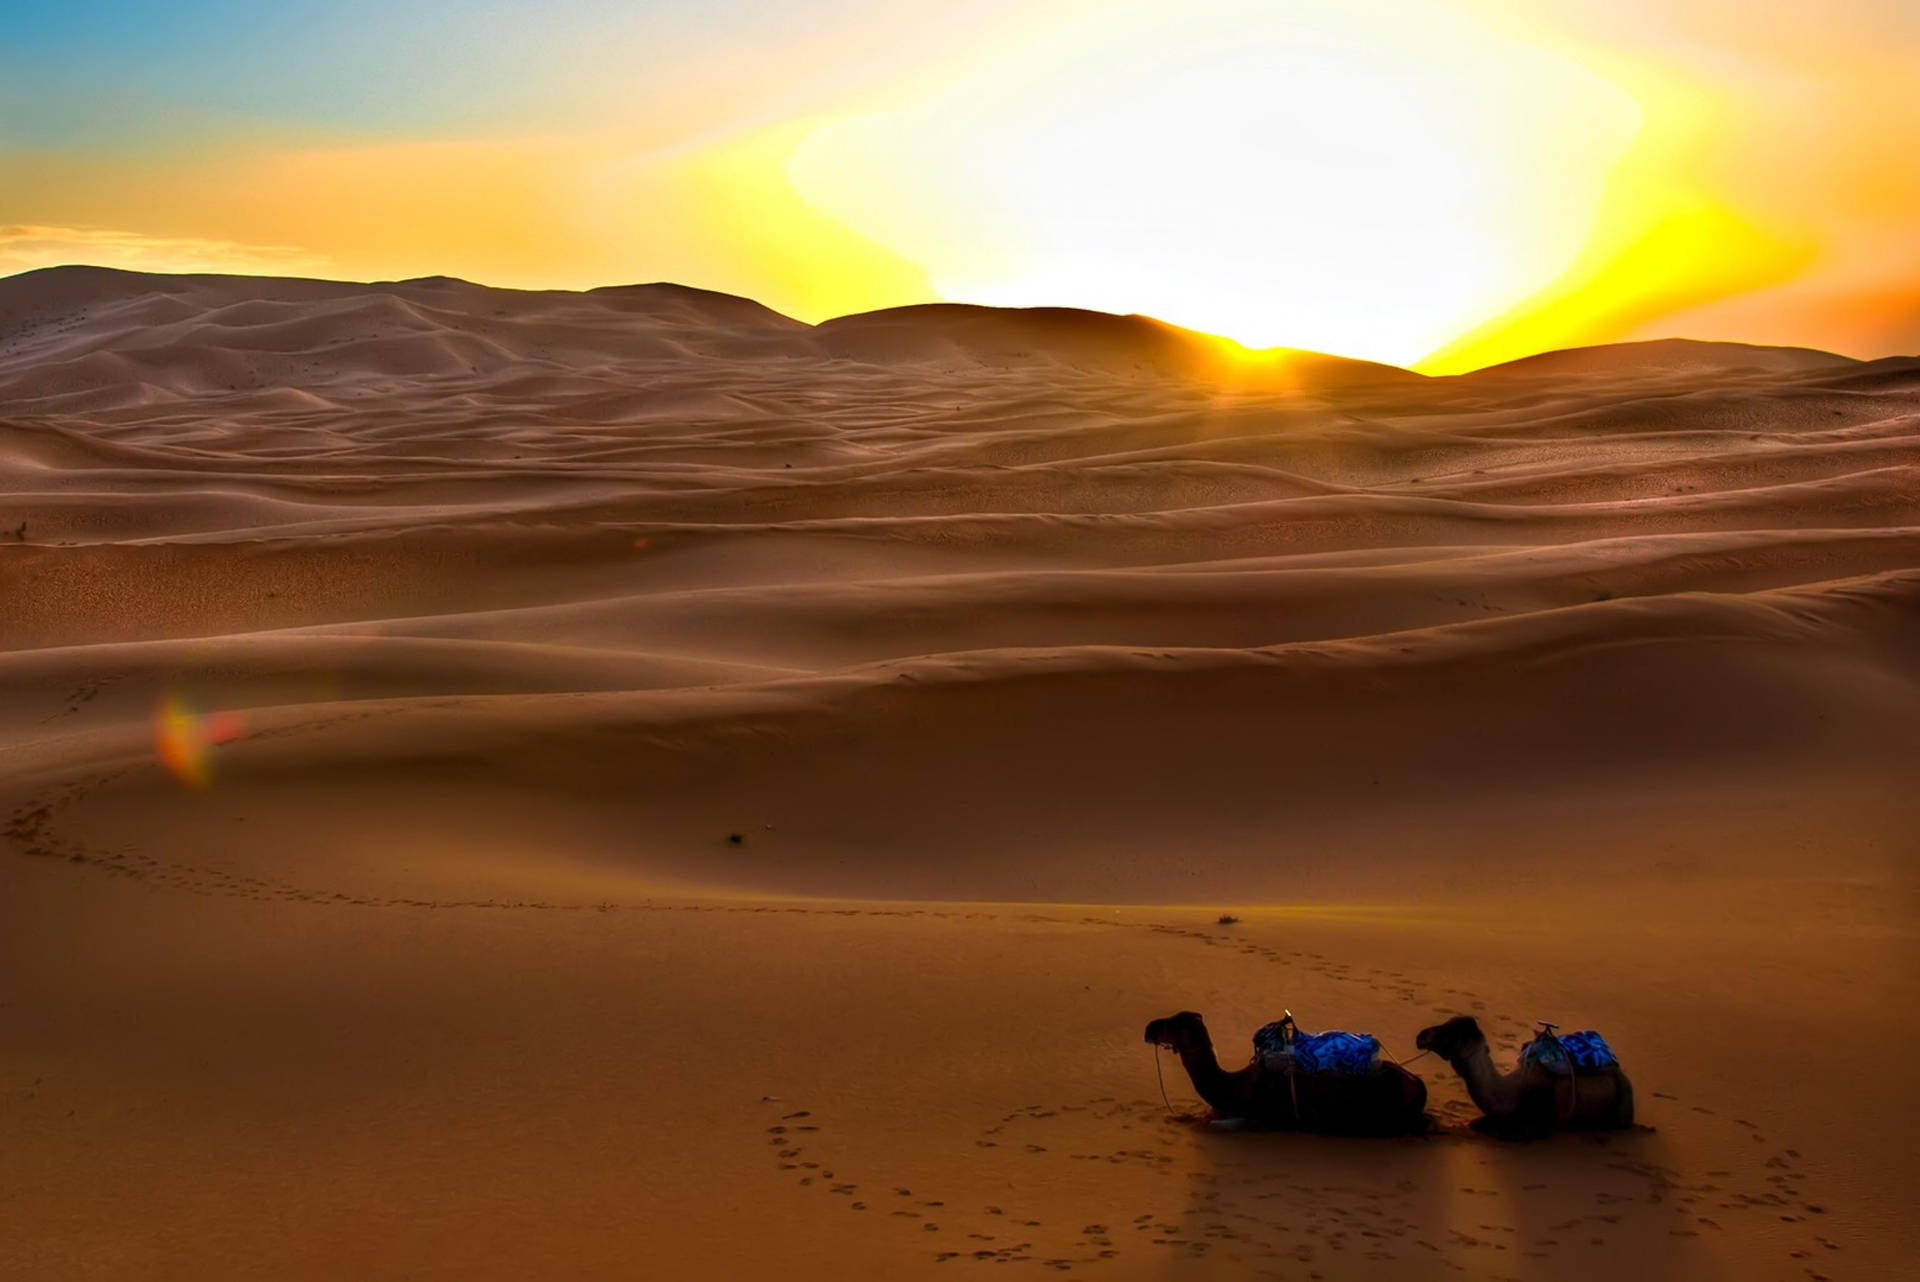 Setting Desert Sun With Camels Background